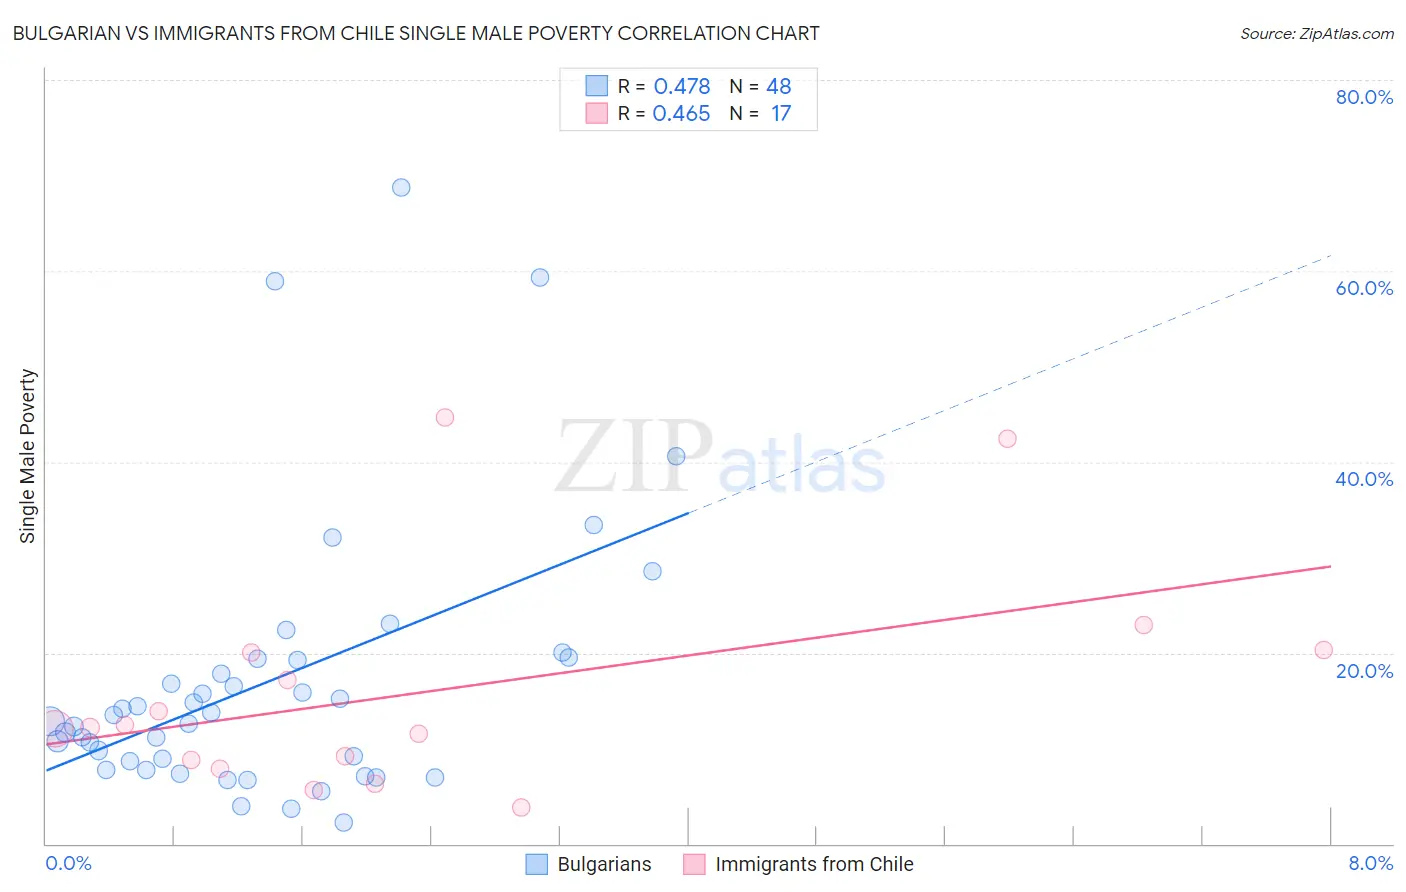 Bulgarian vs Immigrants from Chile Single Male Poverty